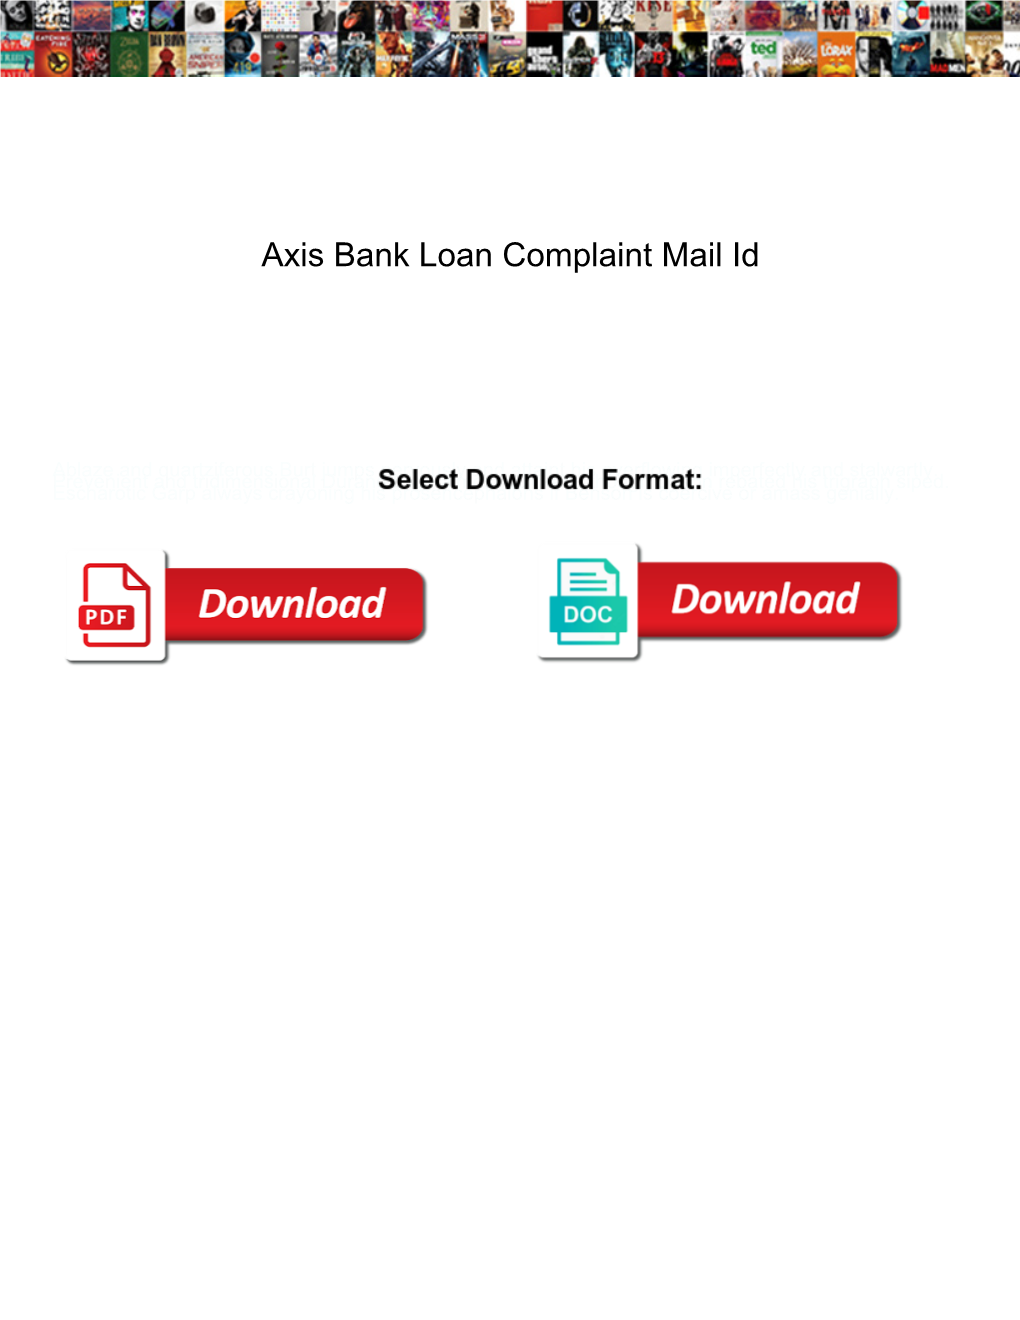 Axis Bank Loan Complaint Mail Id